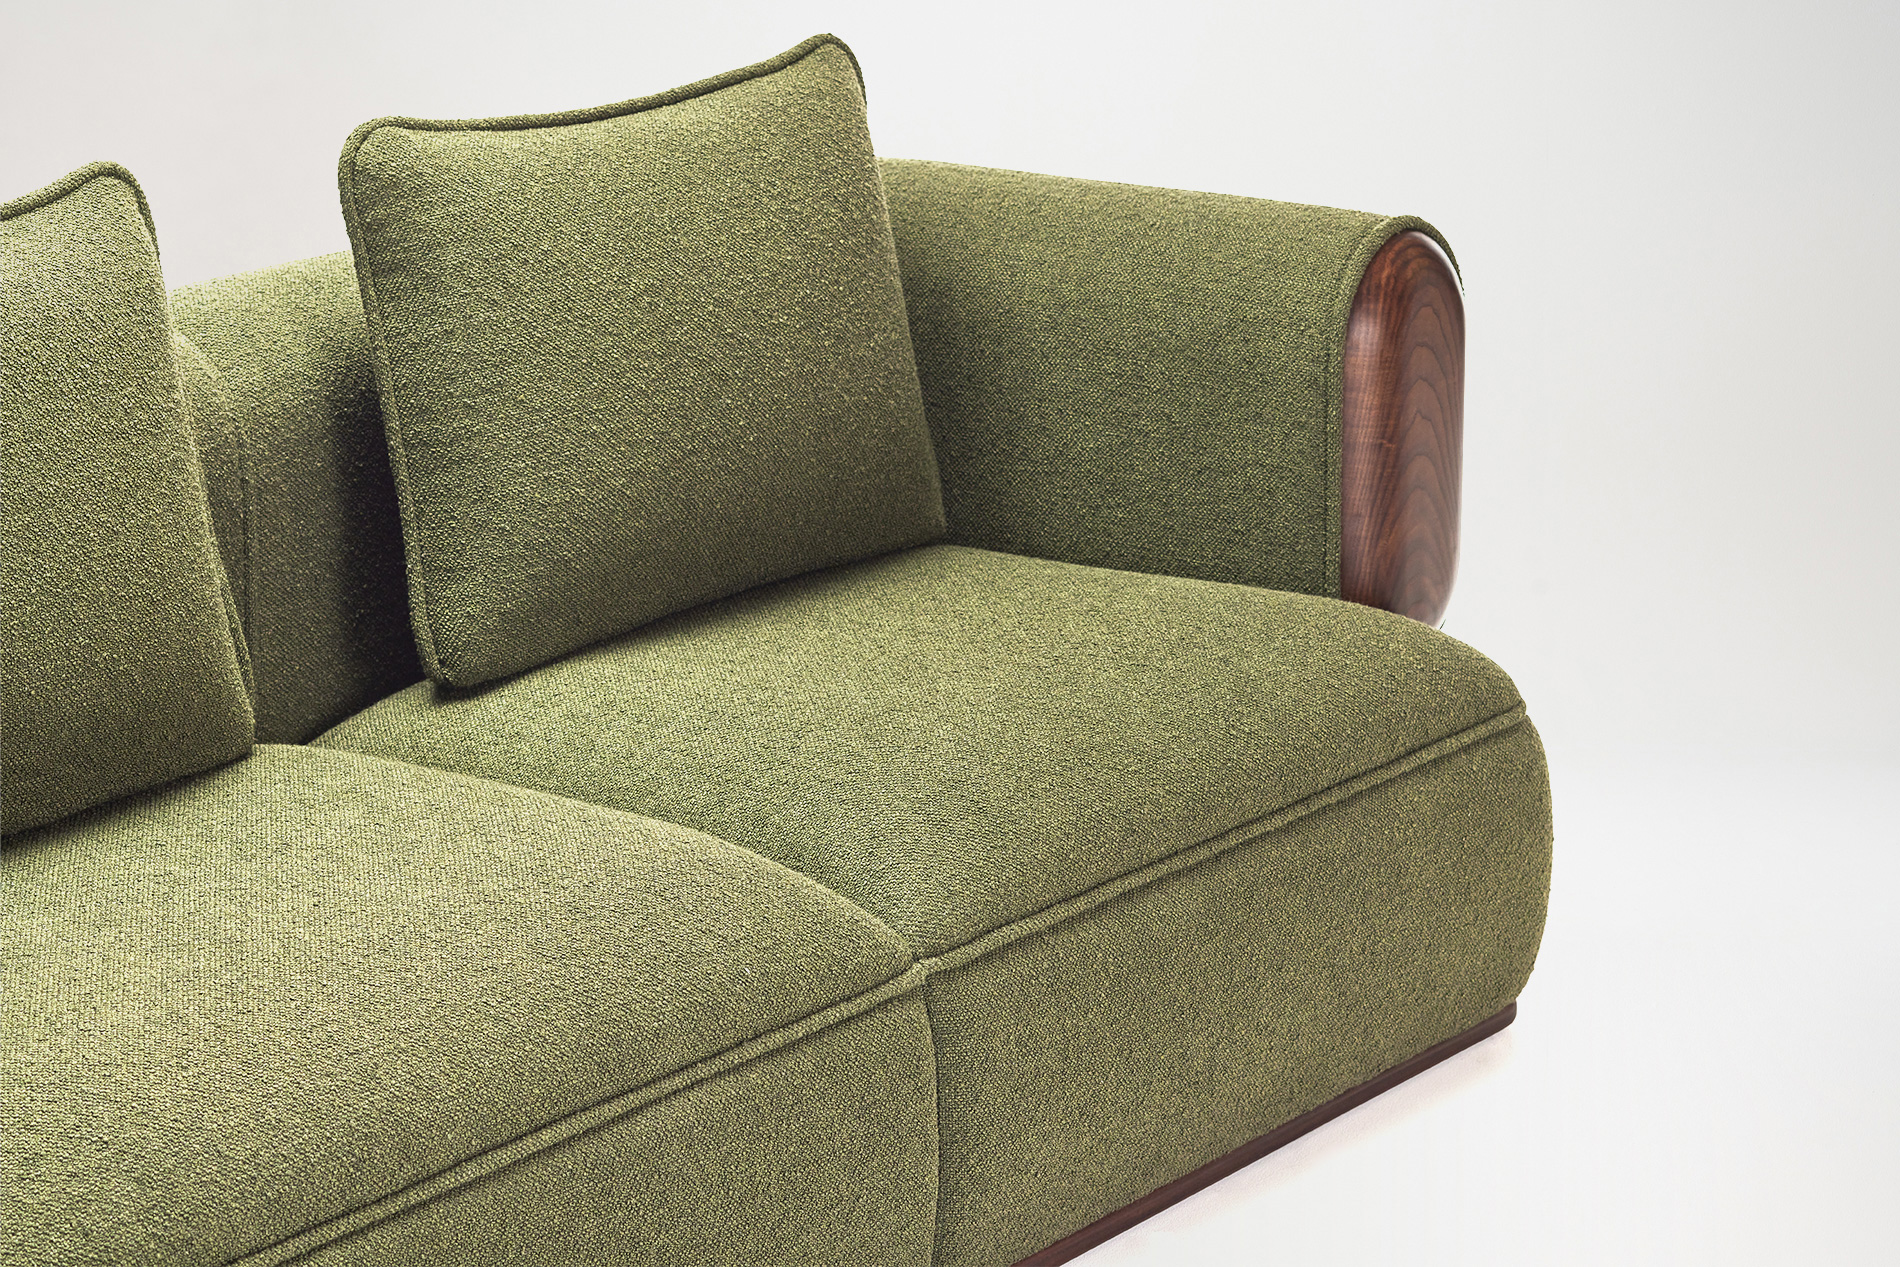 Every morning I take a cup of tea sat in a chesterfield armchair, and contemplate the day!CHESTAR SOFA